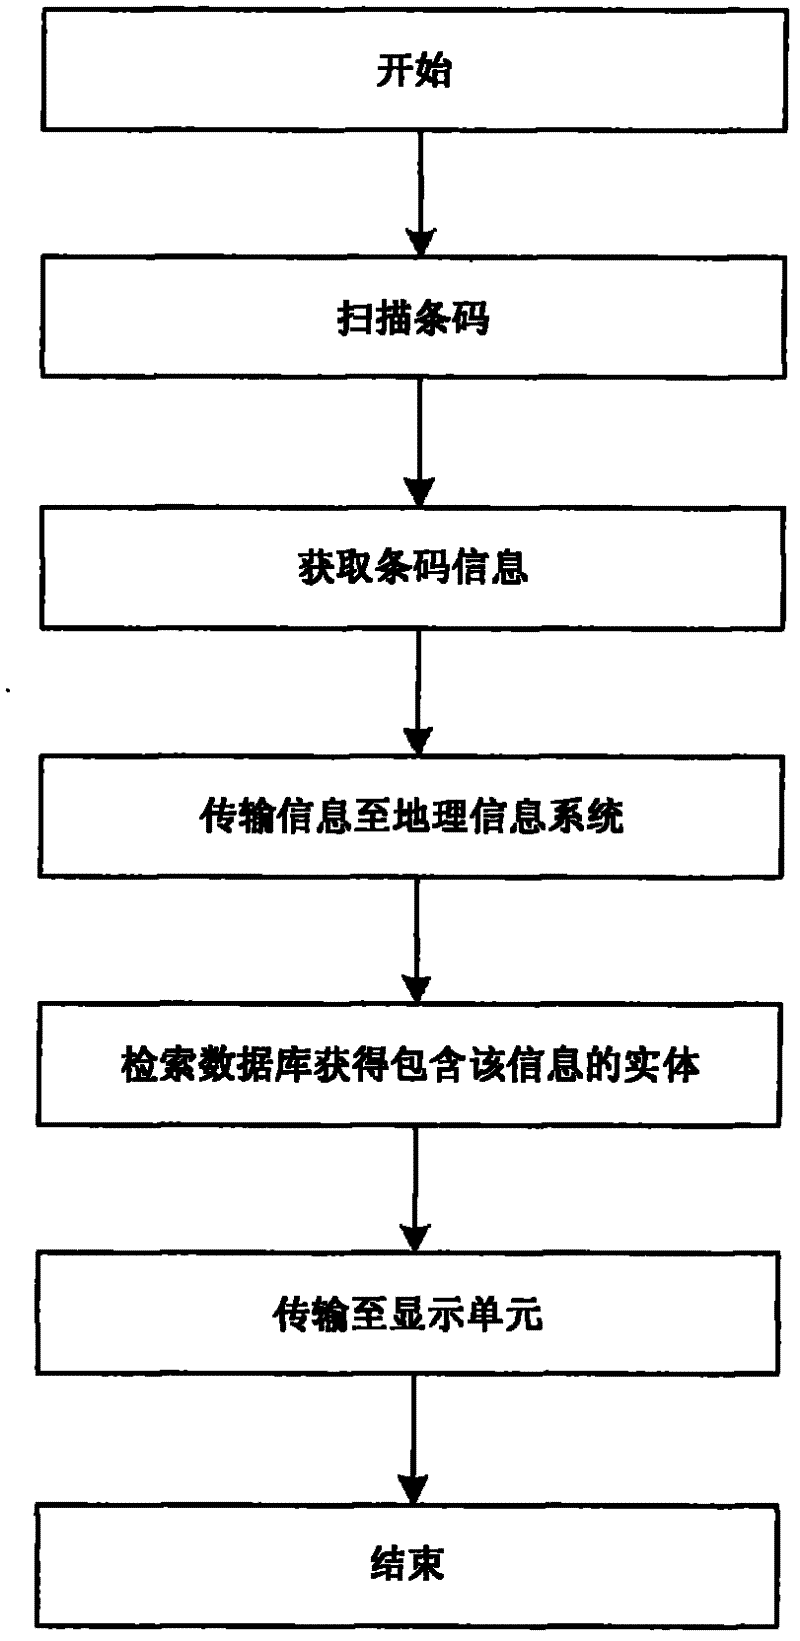 Positioning method and positioning system based on bar code identification technology and GIS (Geographic Information System) technology